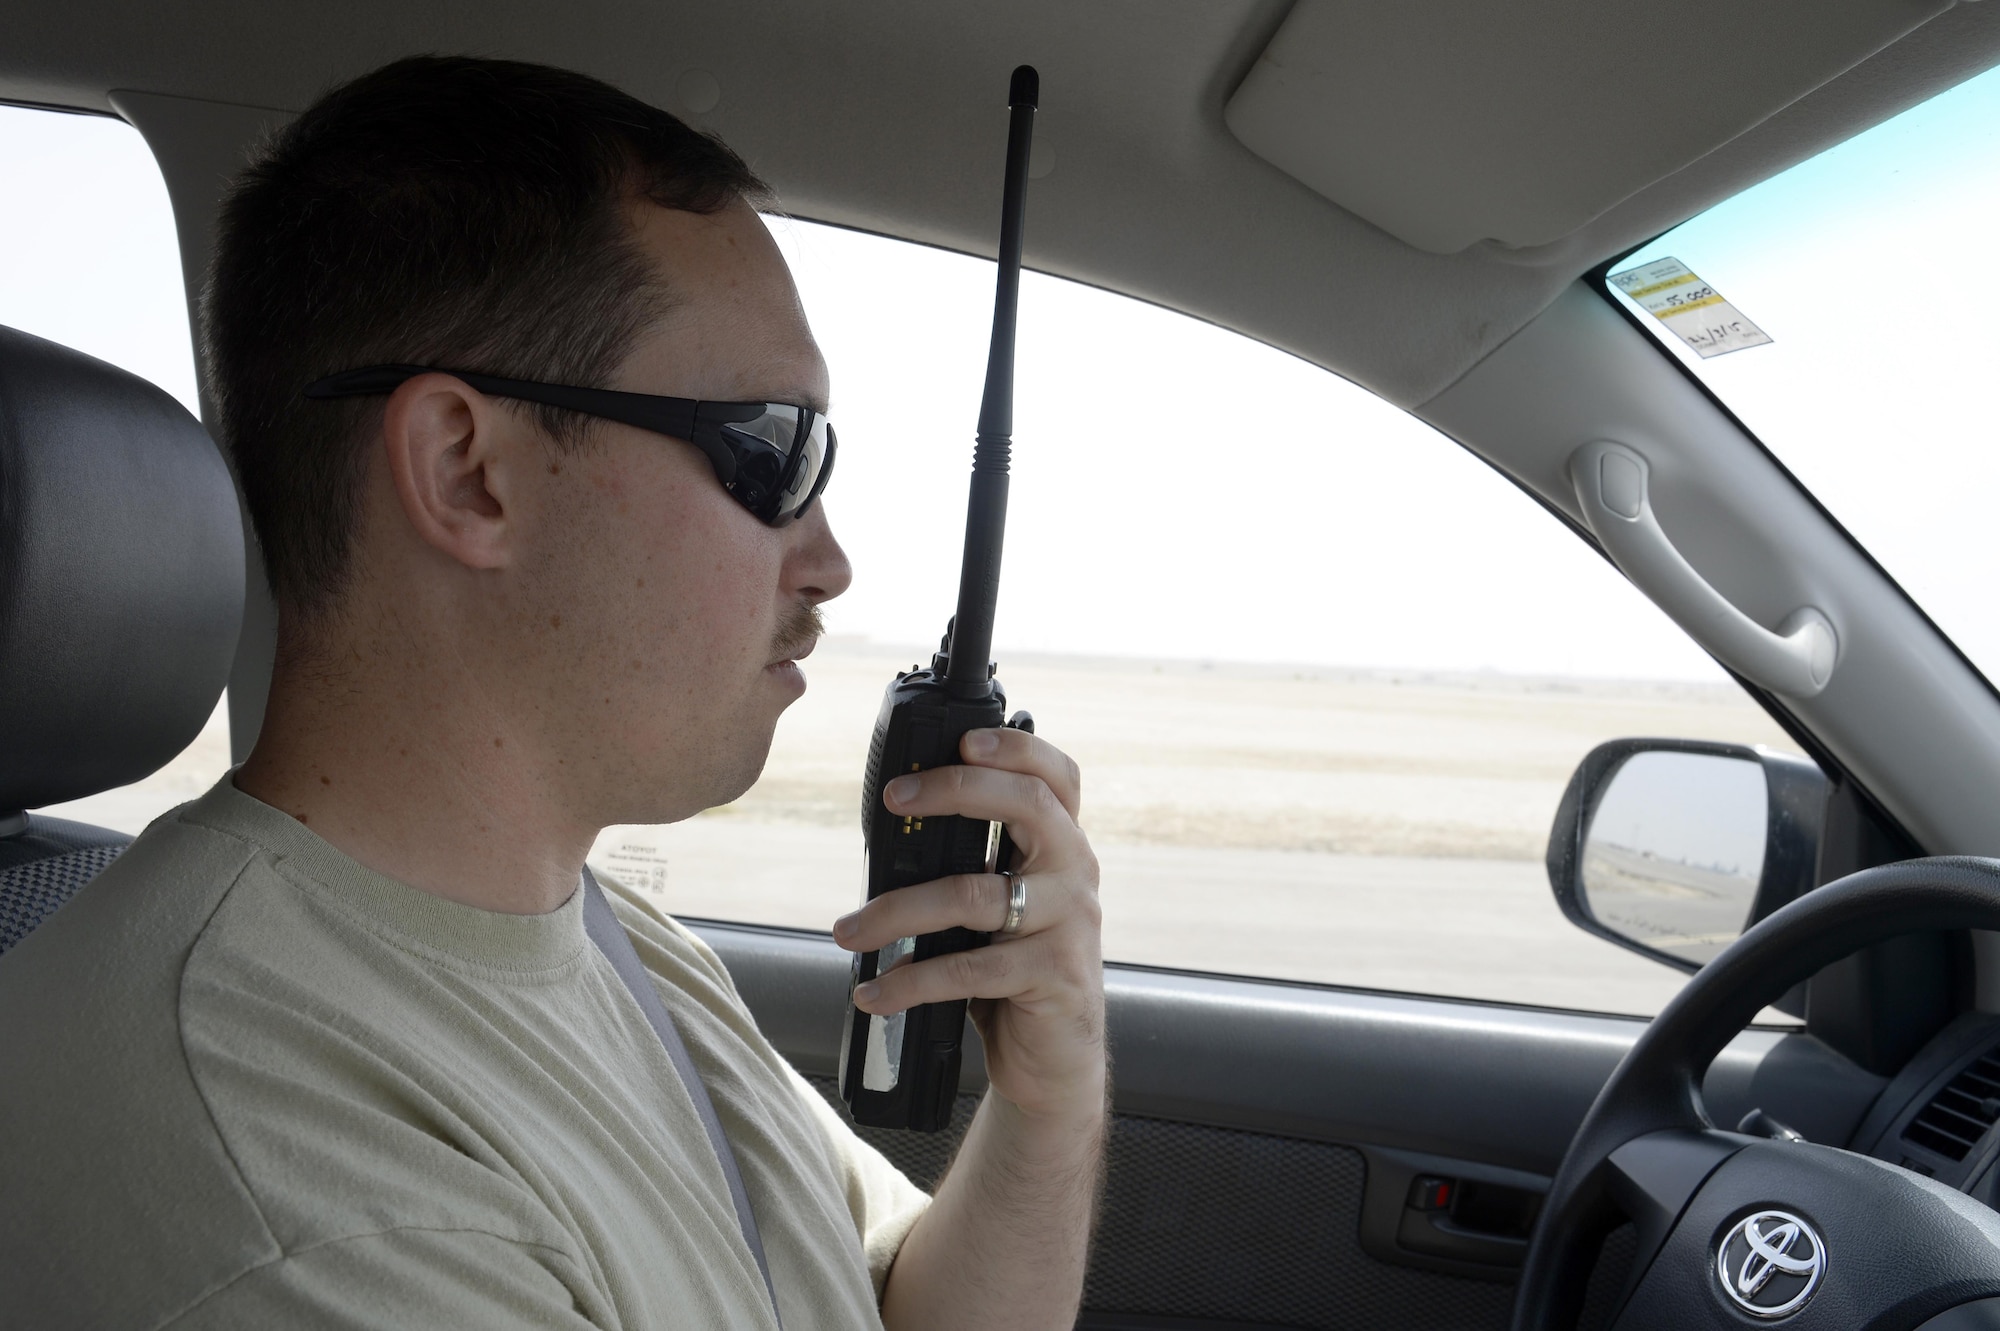 Senior Airman Matthew, airfield management shift lead, radios into the tower for approval to access an active runway during a routine inspection at an undisclosed location in Southwest Asia April 1, 2015. Airfield Management inspects the runway and taxiways throughout the day to make sure there is no debris that can damage aircraft. Matthew is currently deployed from McChord Air Force Base, Wash. (U.S. Air Force photo/Tech. Sgt. Marie Brown/RELEASED)